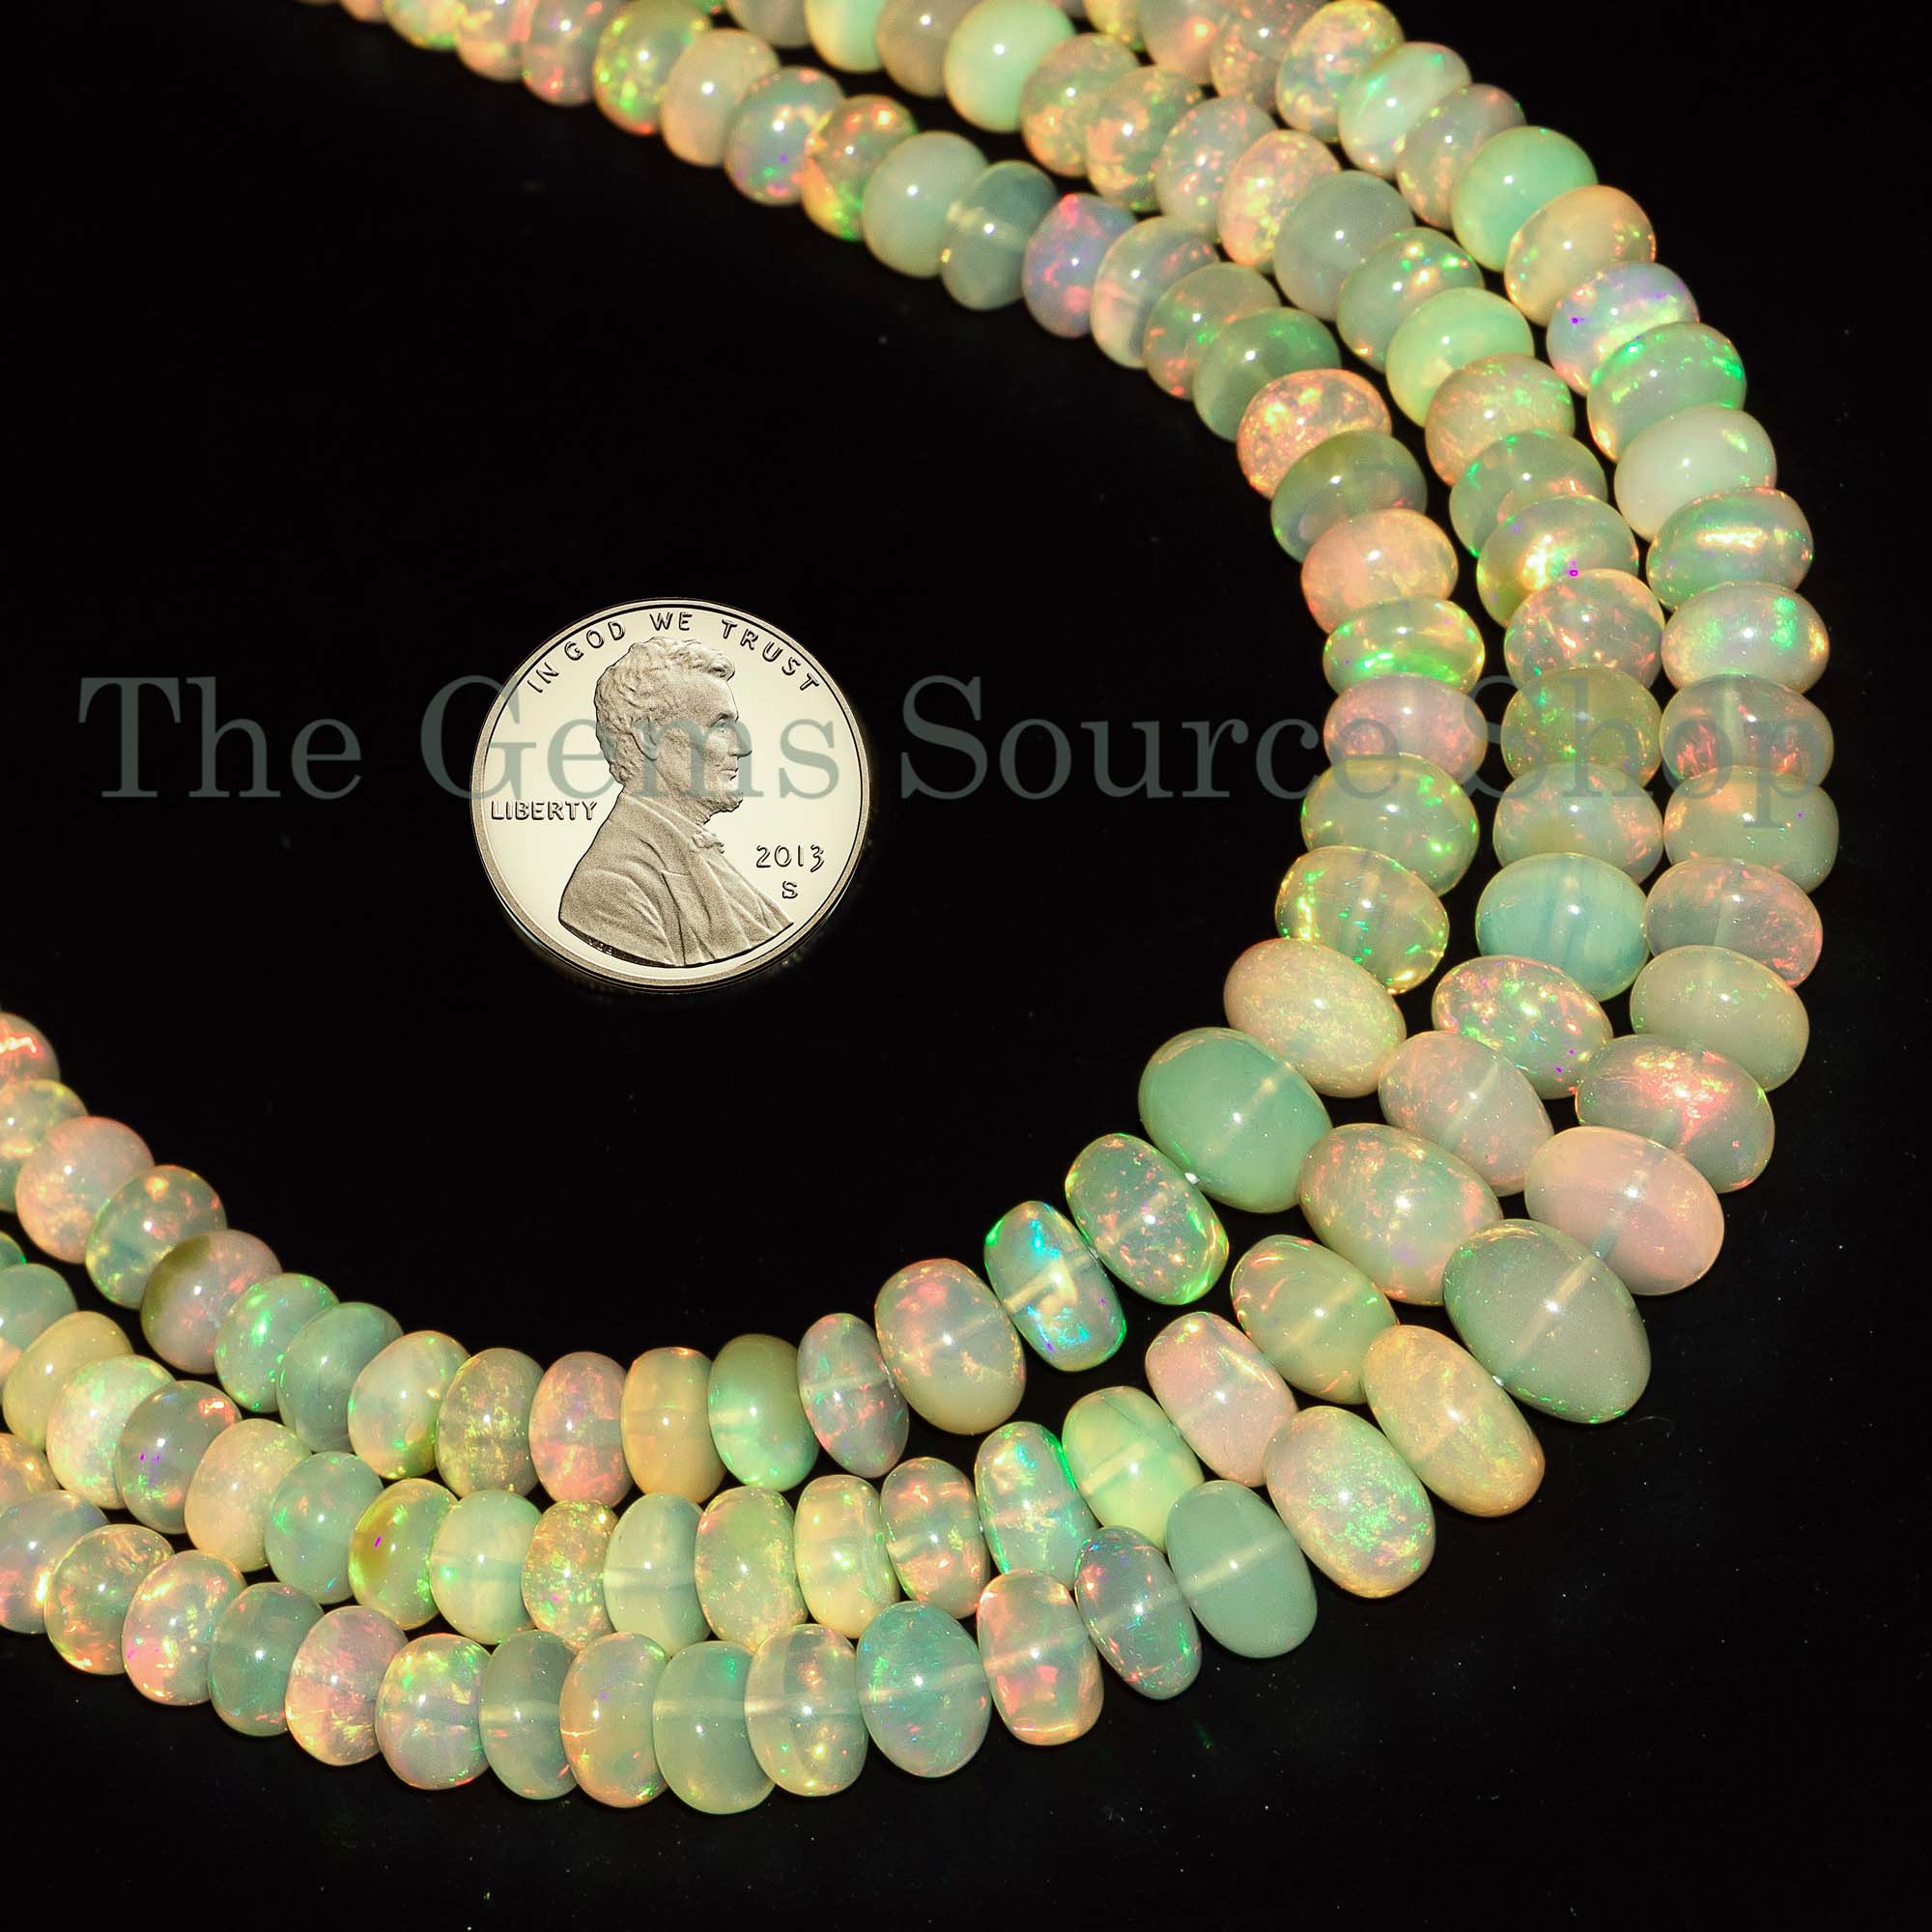 4.5-8 mm Natural Ethiopian Opal Necklace, Top Quality Ethiopian Opal Gemstone, Opal Beaded Necklace, Rondelle Necklace, Opal Necklace Beads